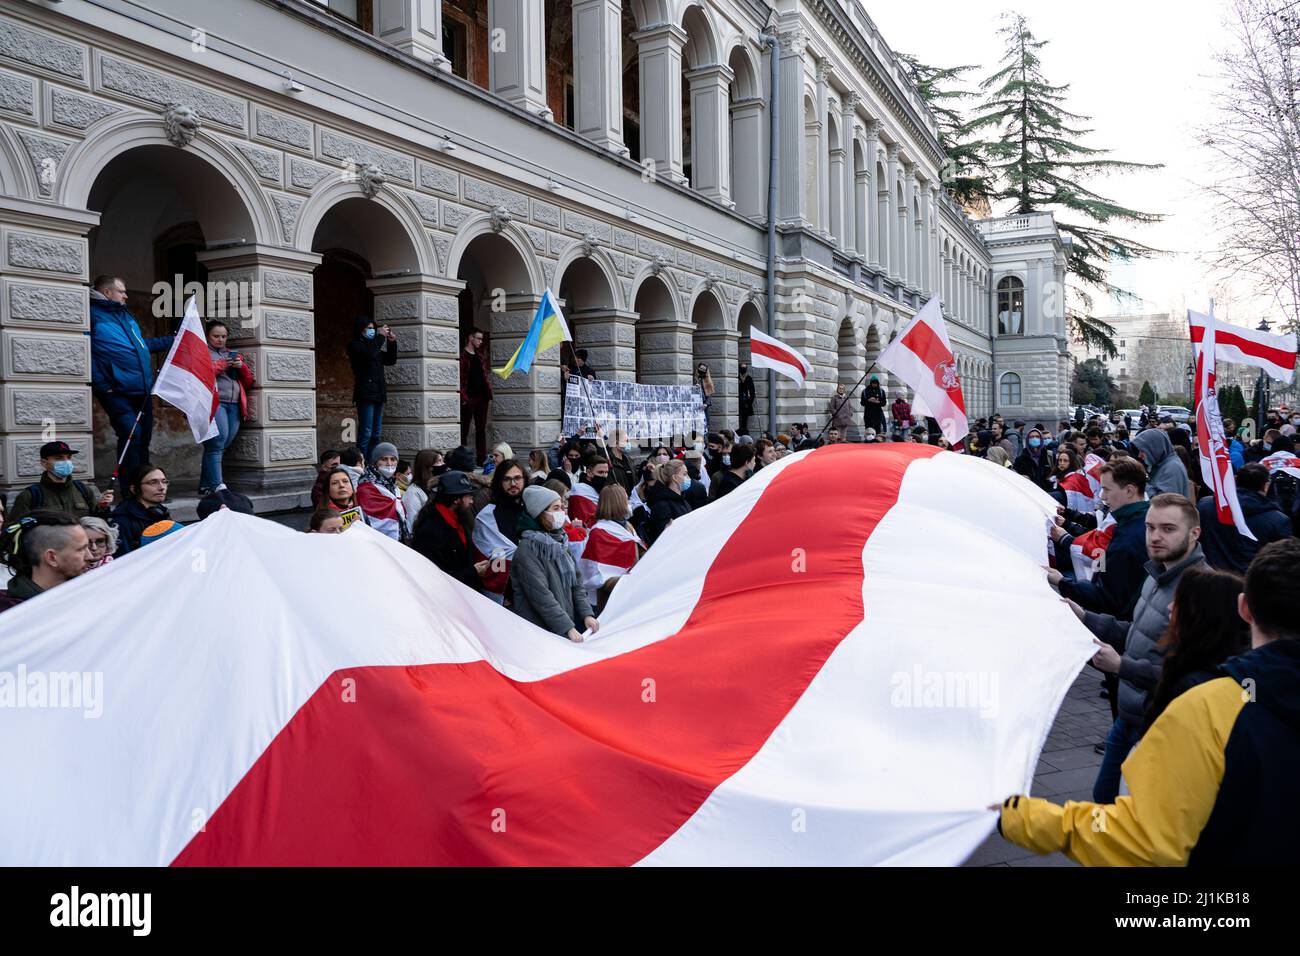 Belarusian people participate in peaceful protest against the dictatorship in Belarus Stock Photo